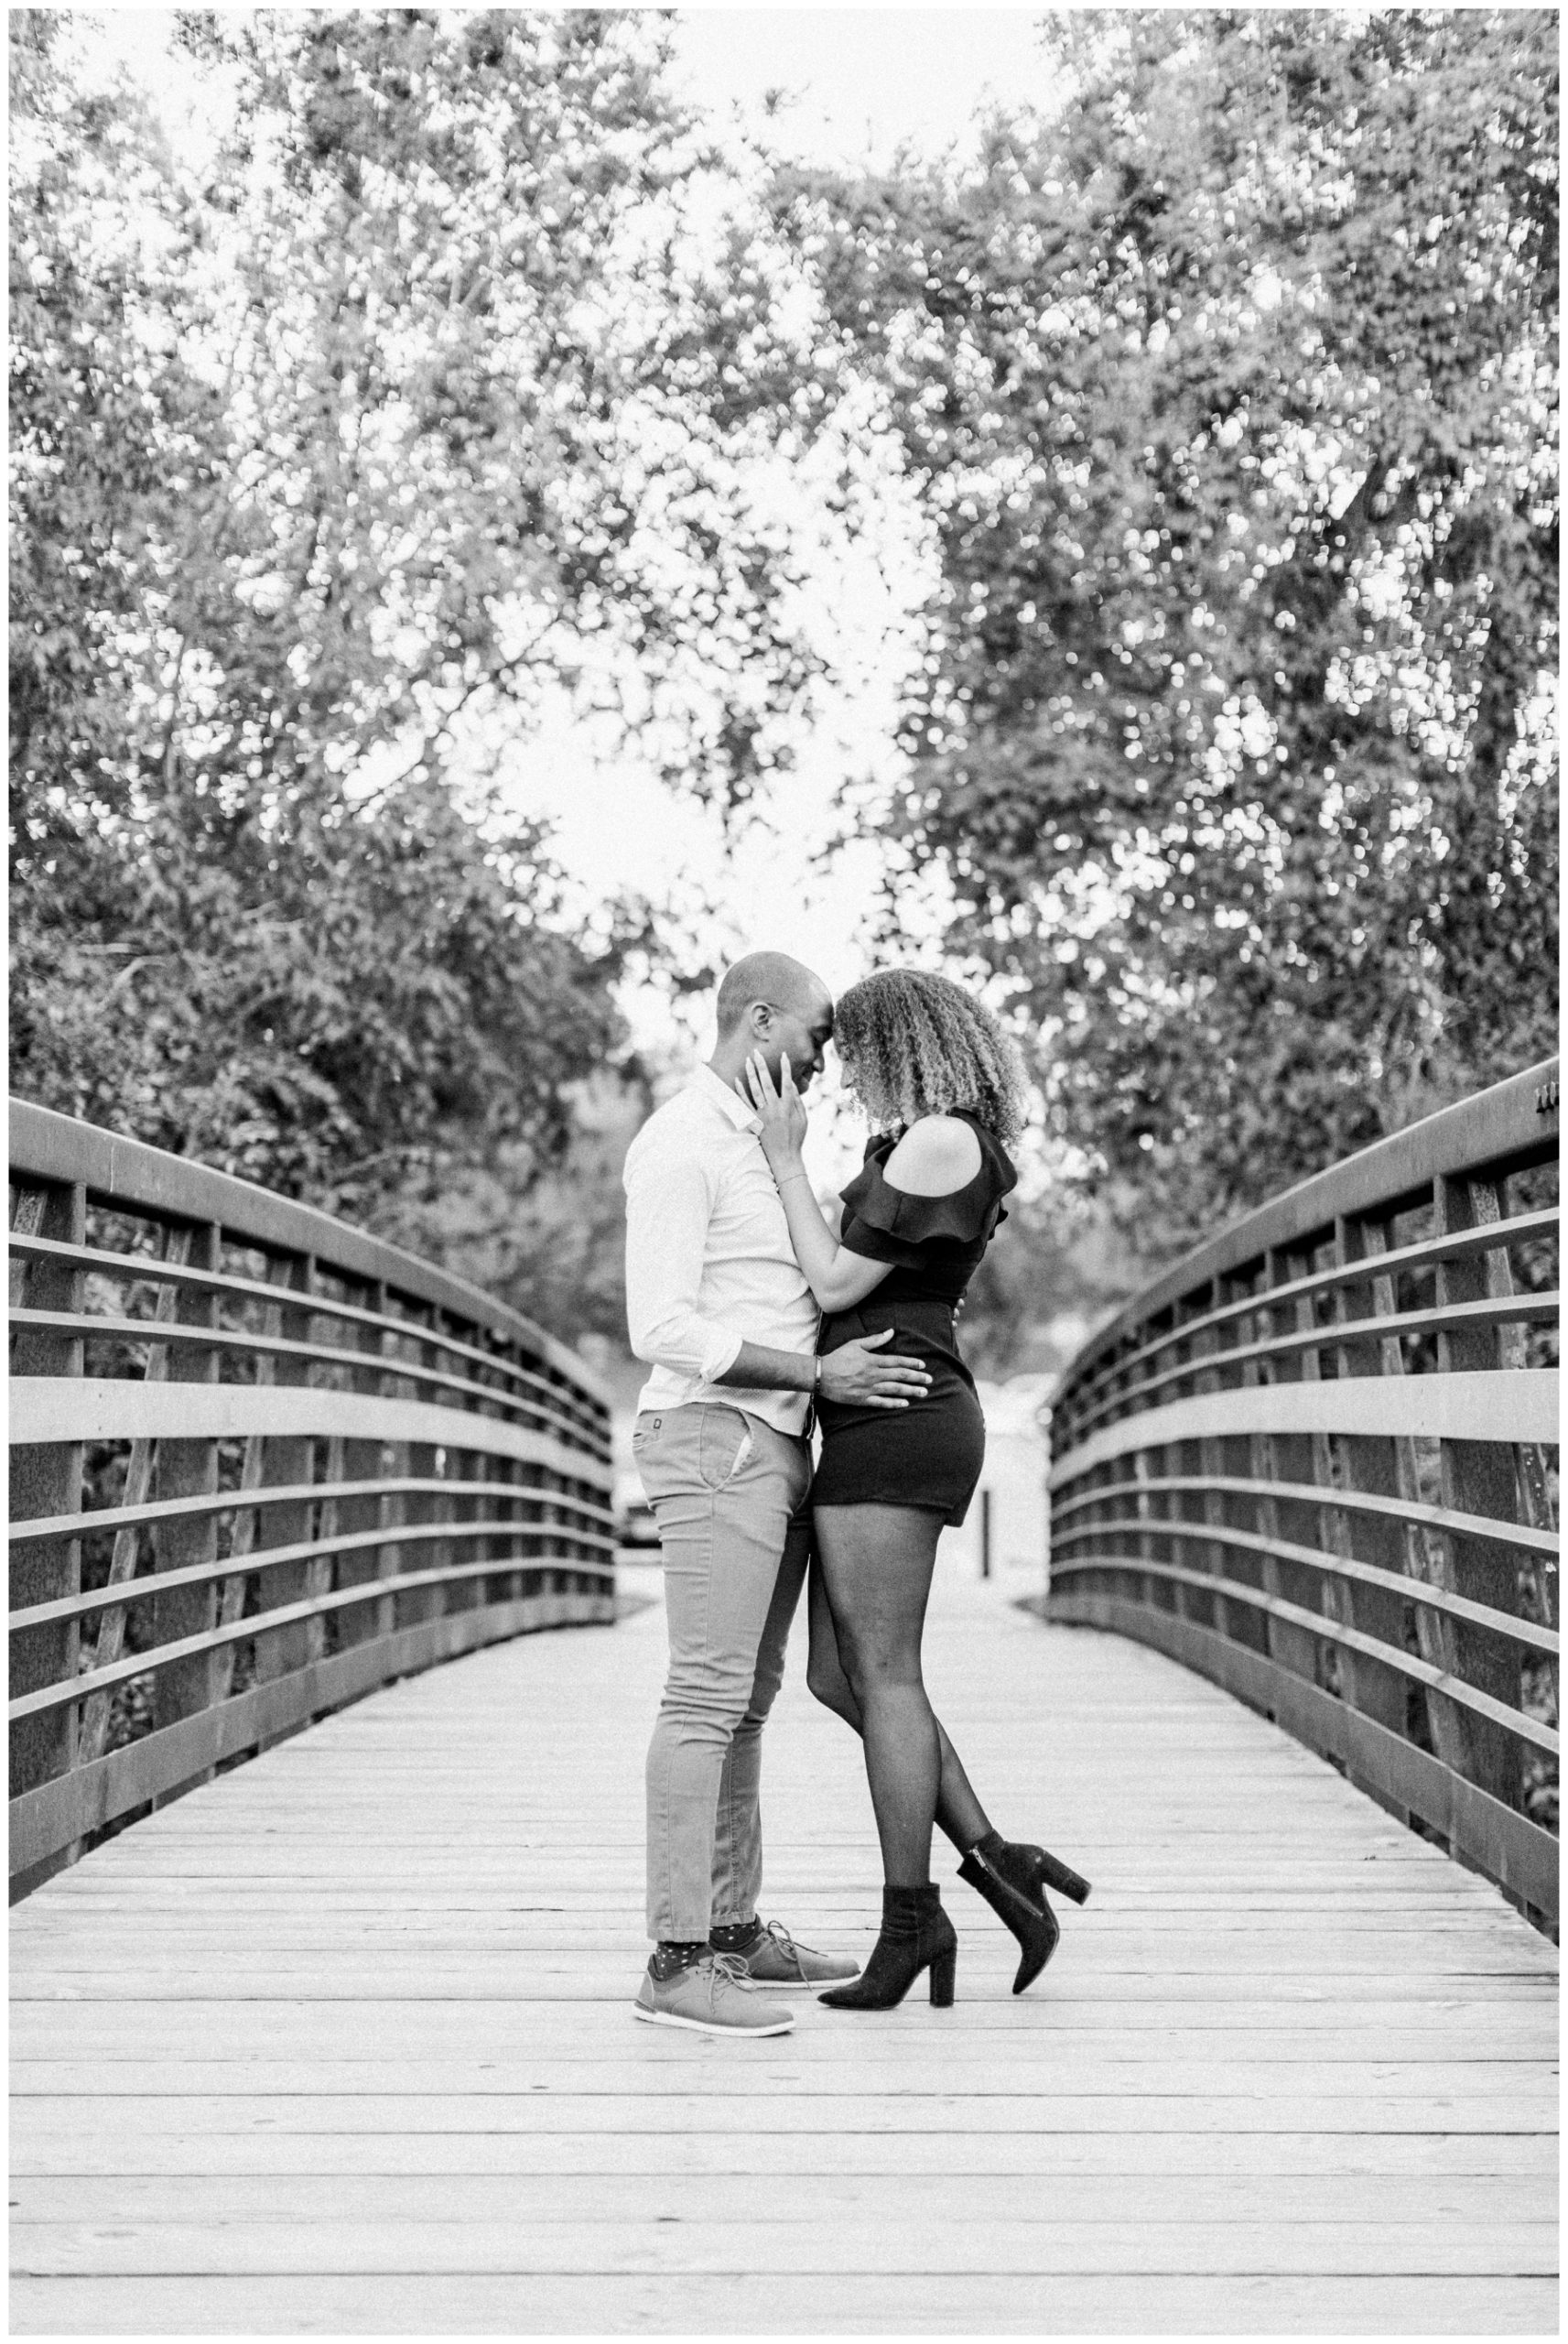 Couple posing together on a bridge for their outdoor engagement session